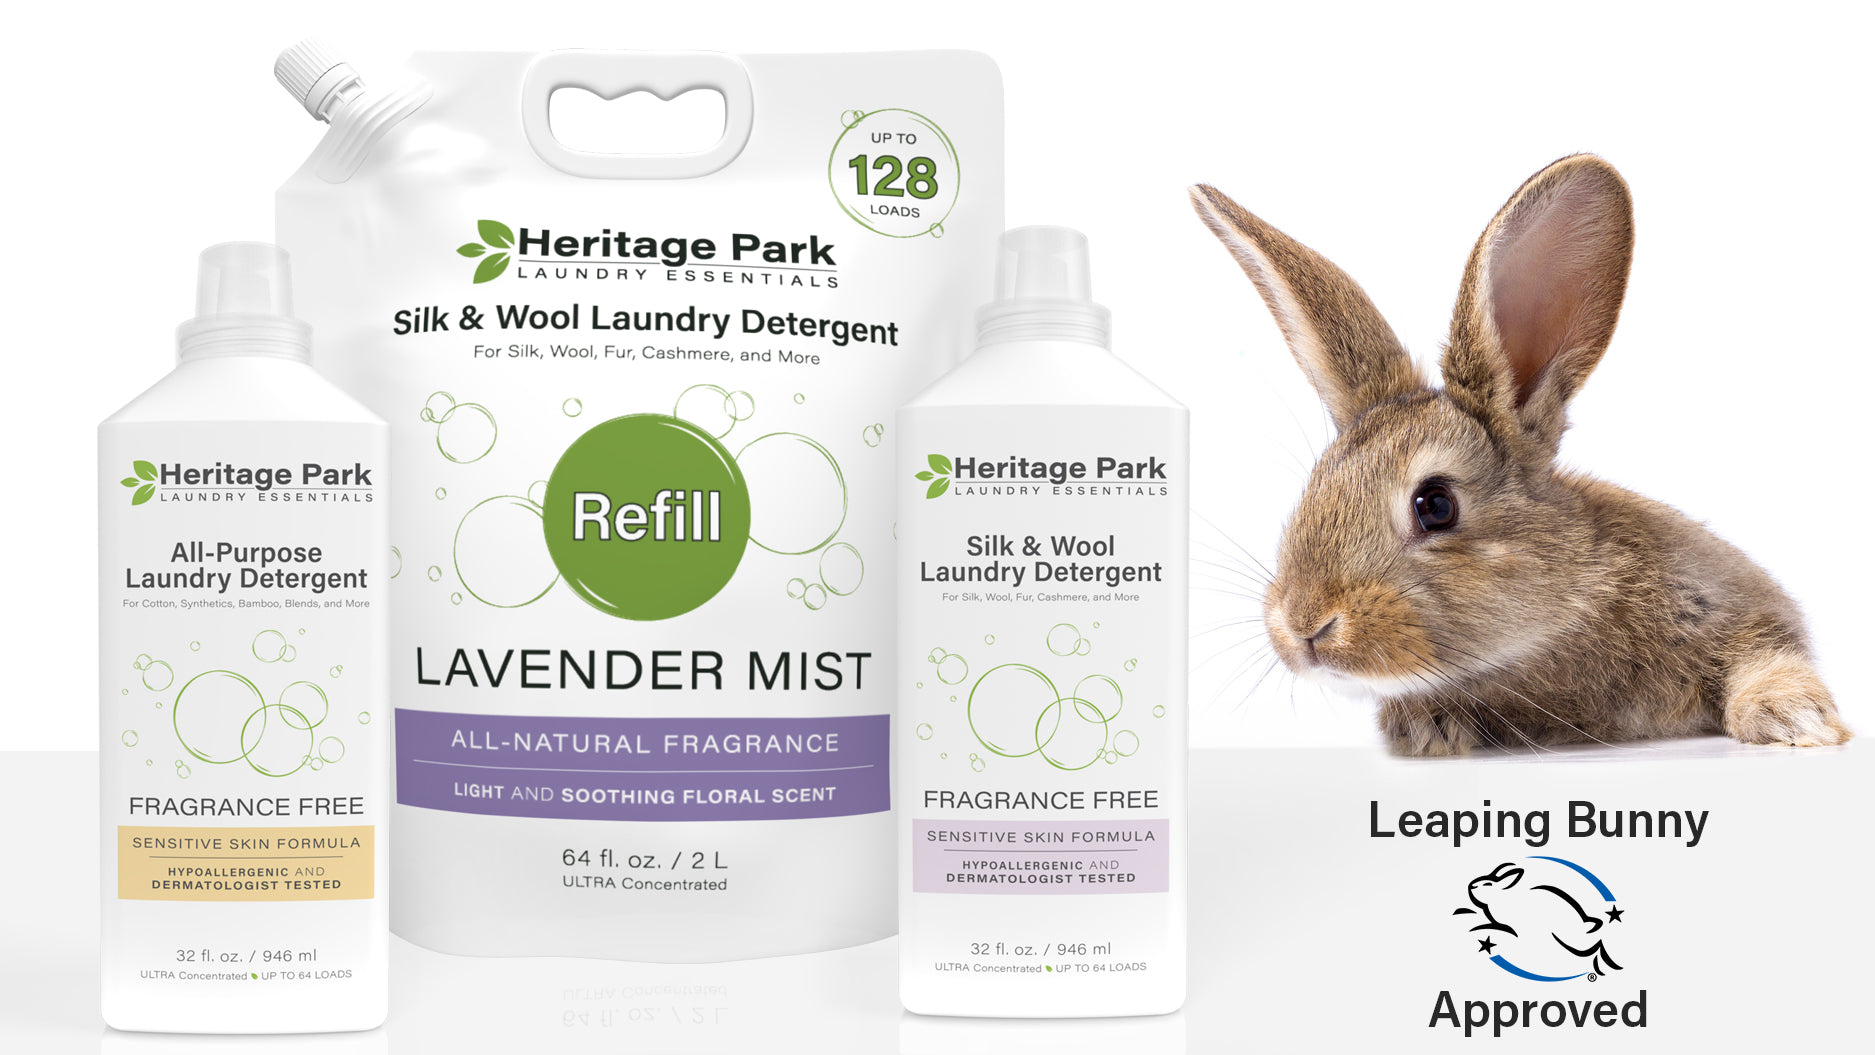 Heritage Park is Leaping Bunny Approved Cruelty-Free Laundry Detergent